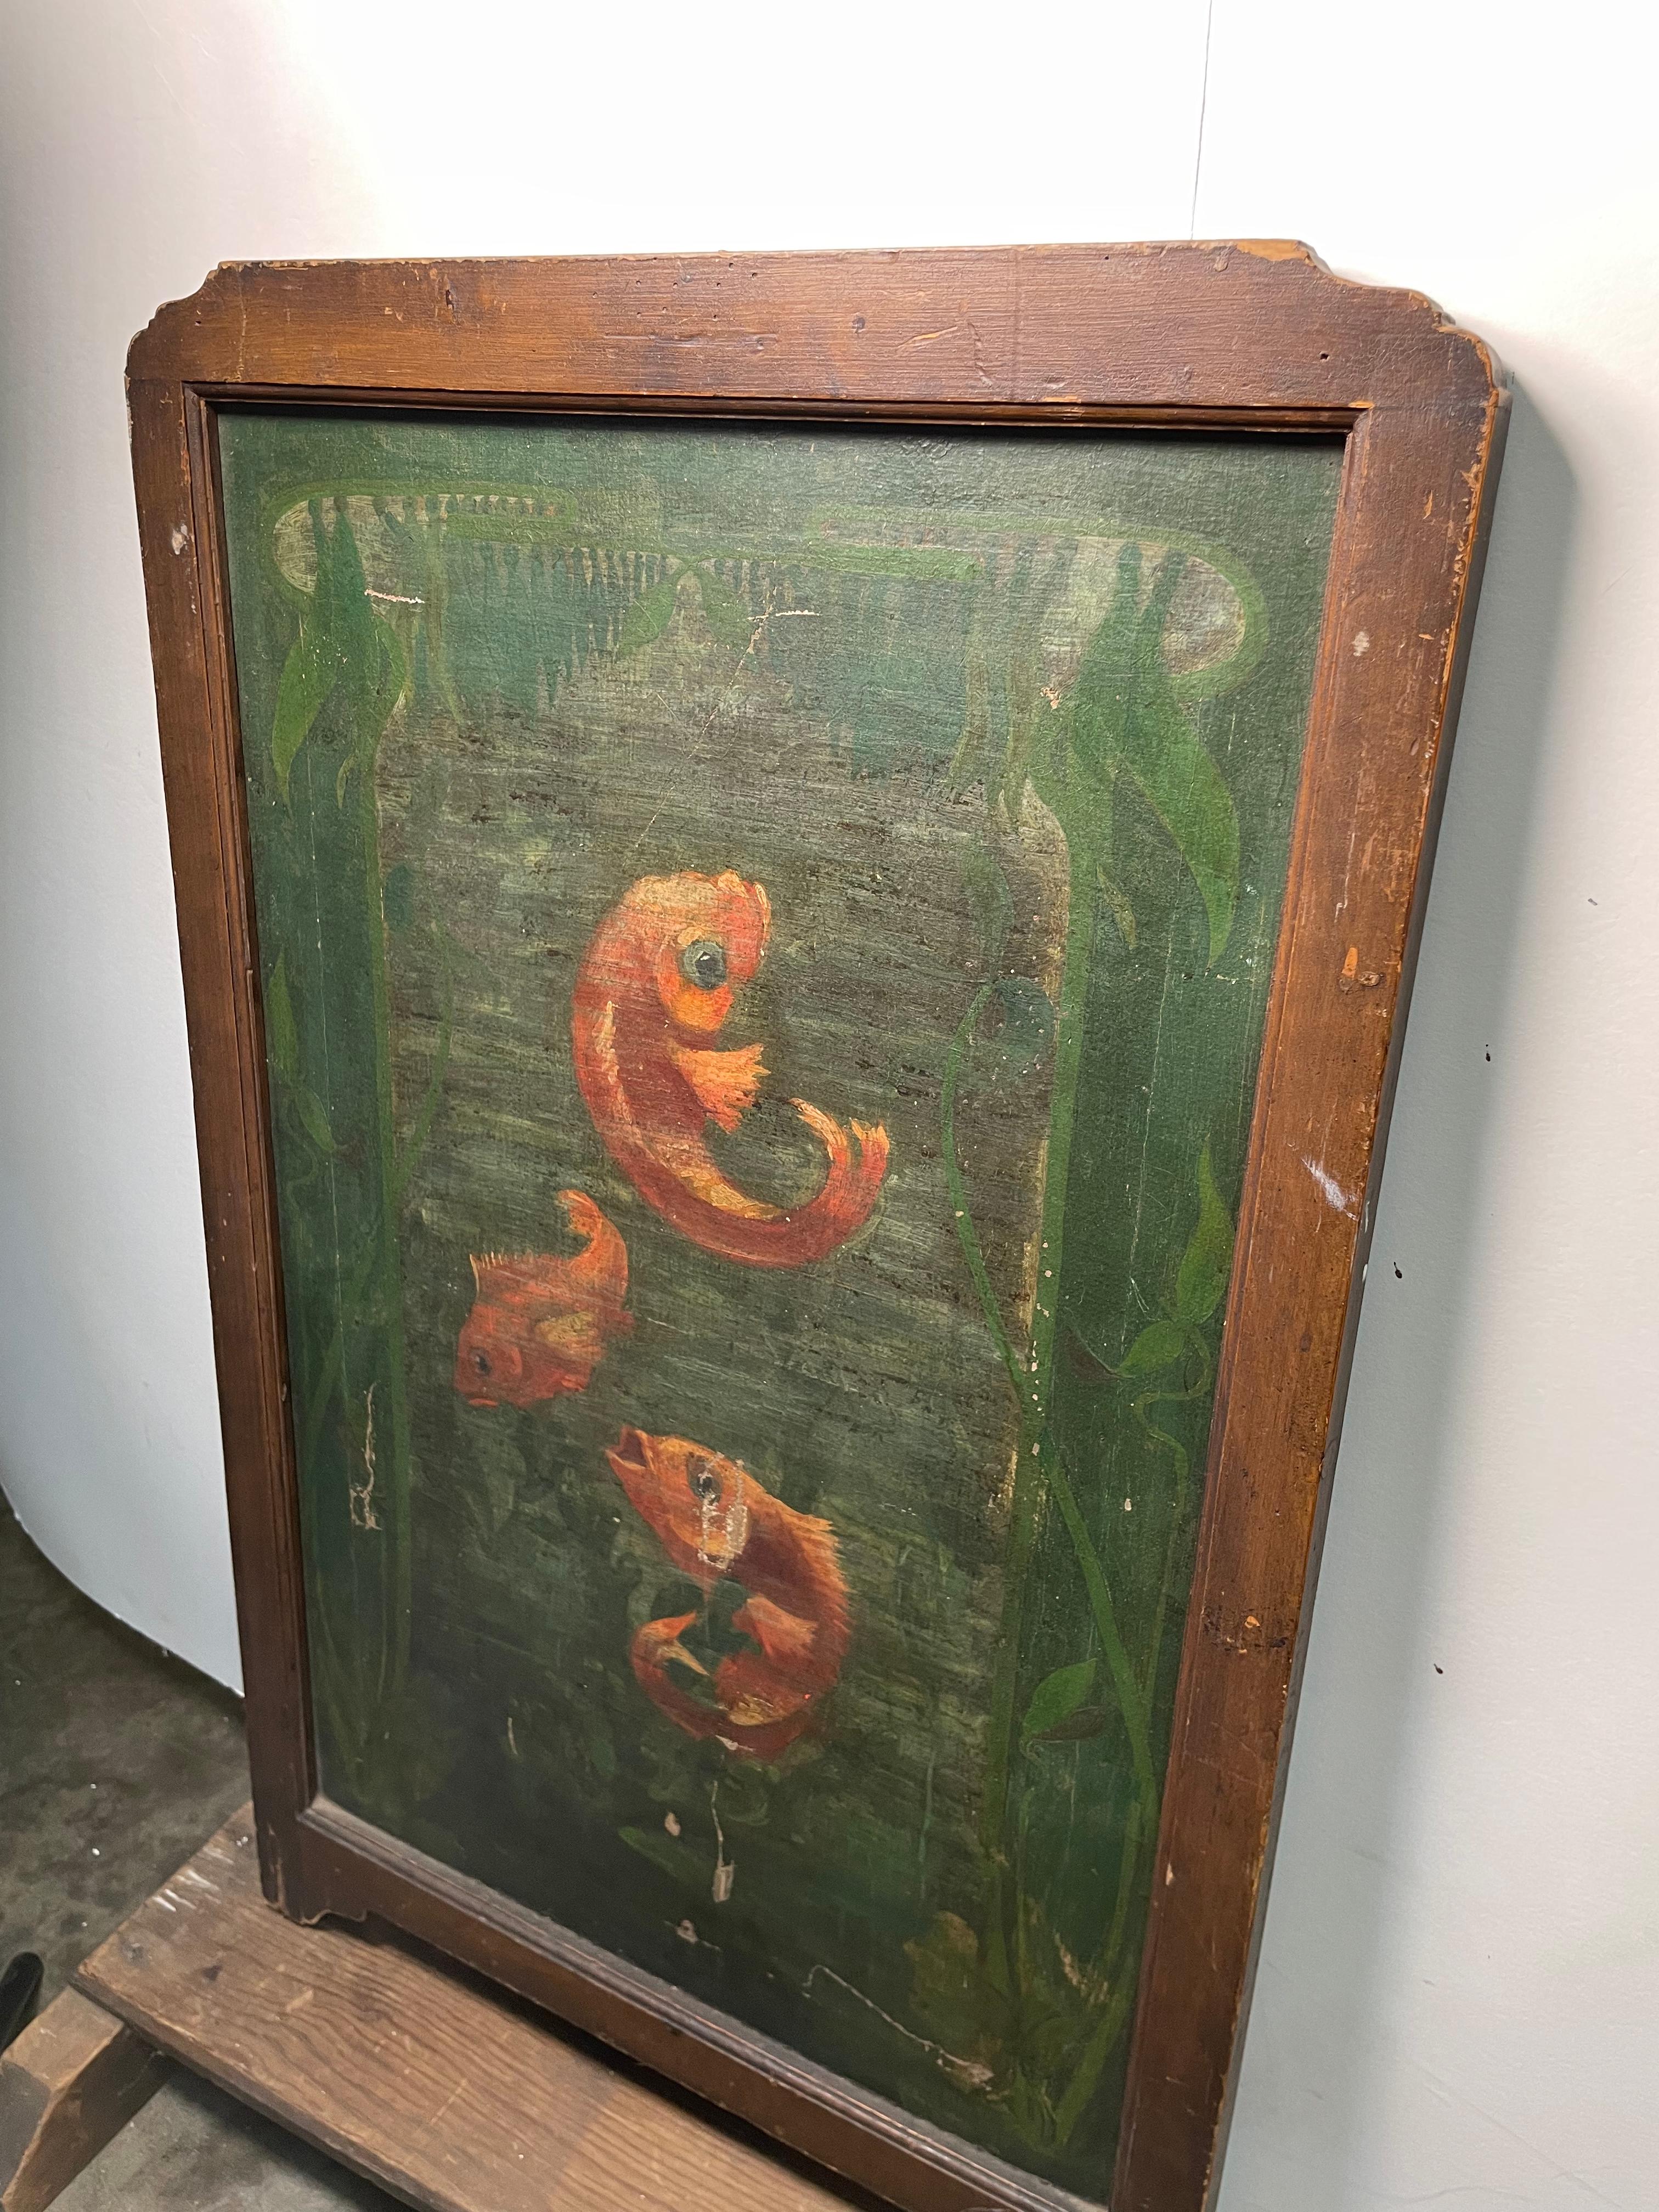 This painting of playful fish was created in the 19th century in Italy. It has the original frame, made with oil paint, and no alterations or restorations. You can see there are vibrant orange fish swimming in a mossy green lake, the contrast makes